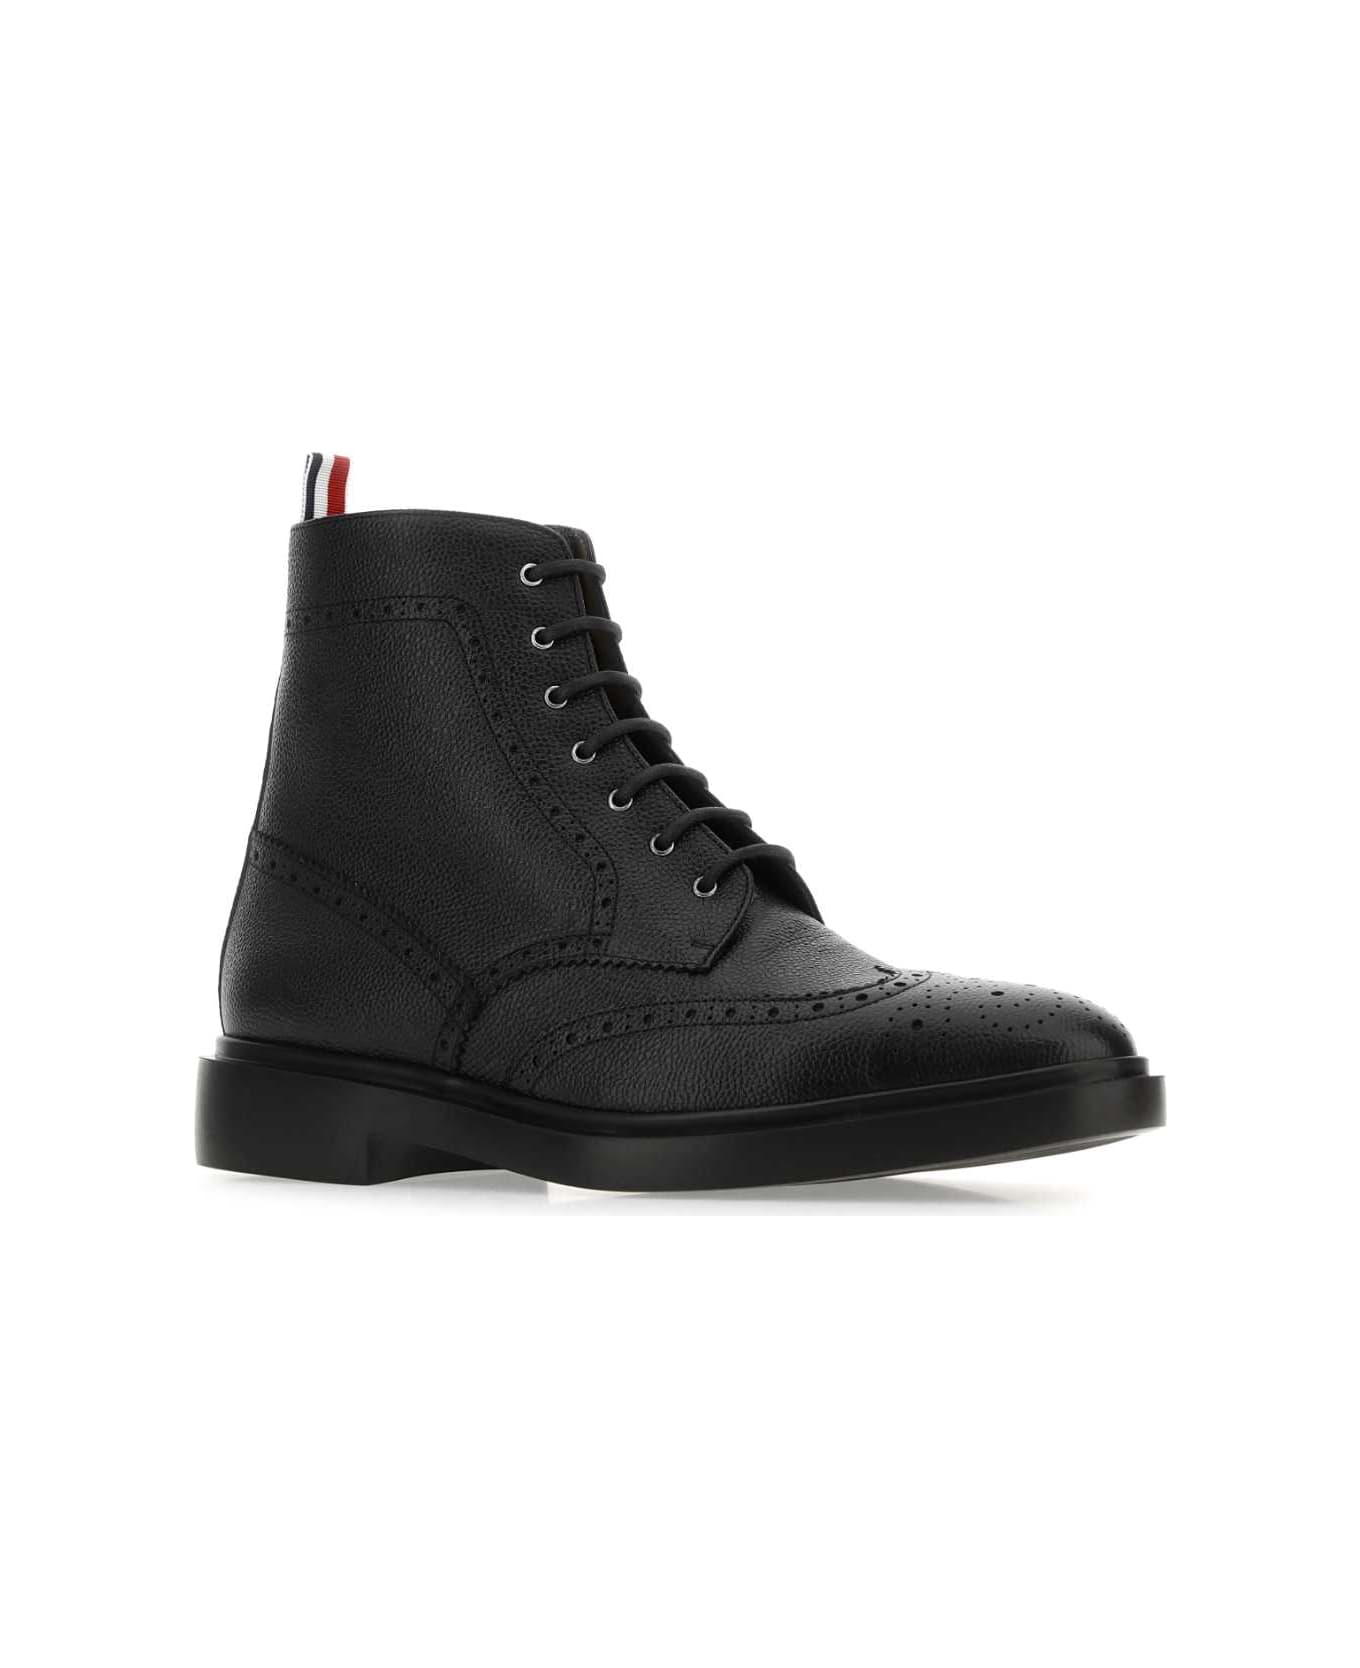 Thom Browne Black Leather Ankle Boots - 001